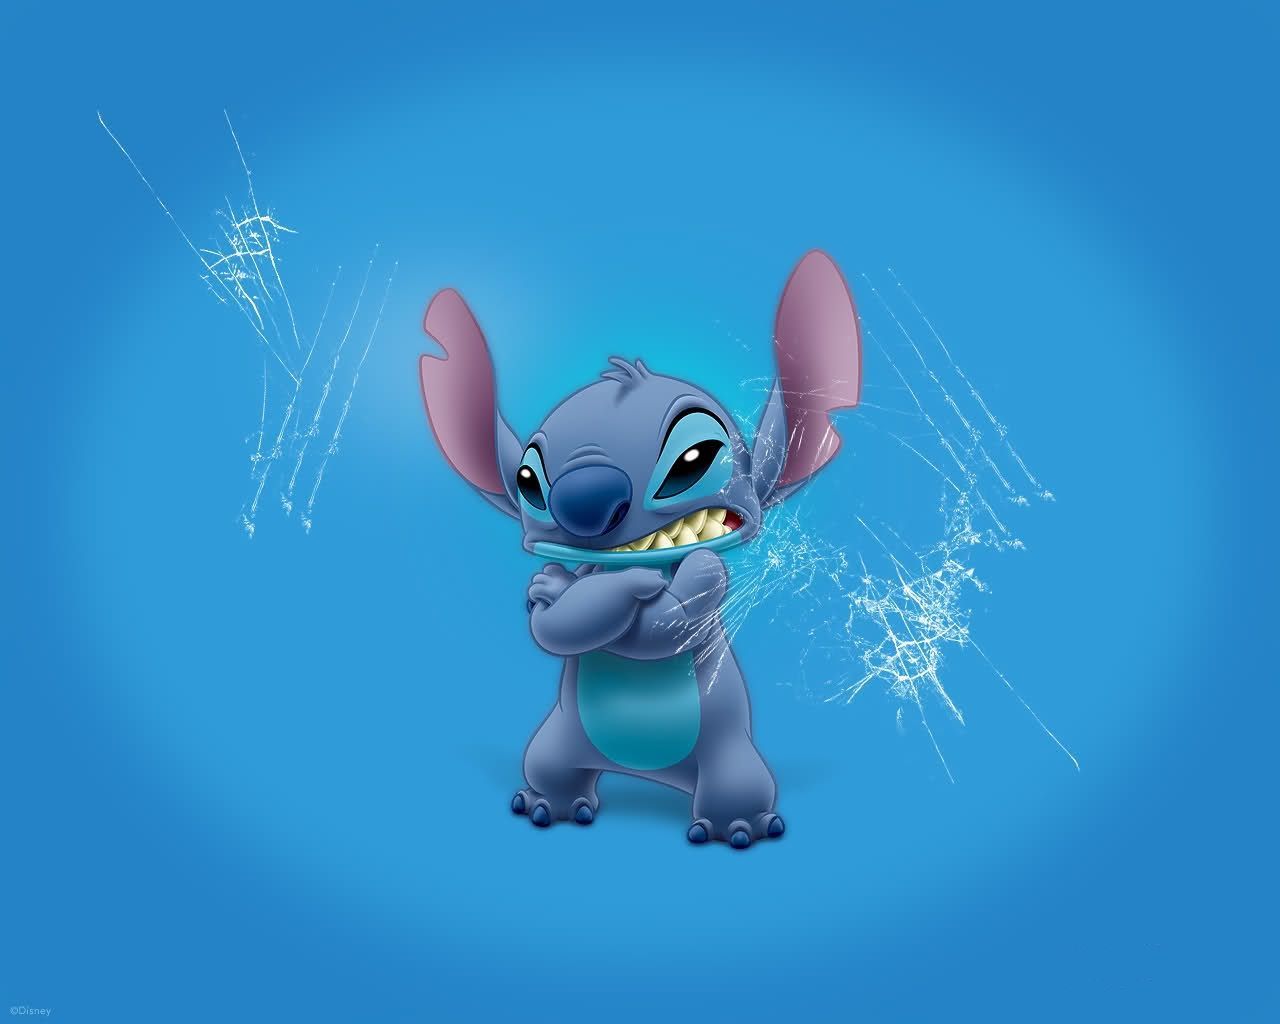 Wallpaper Stitch For Laptop